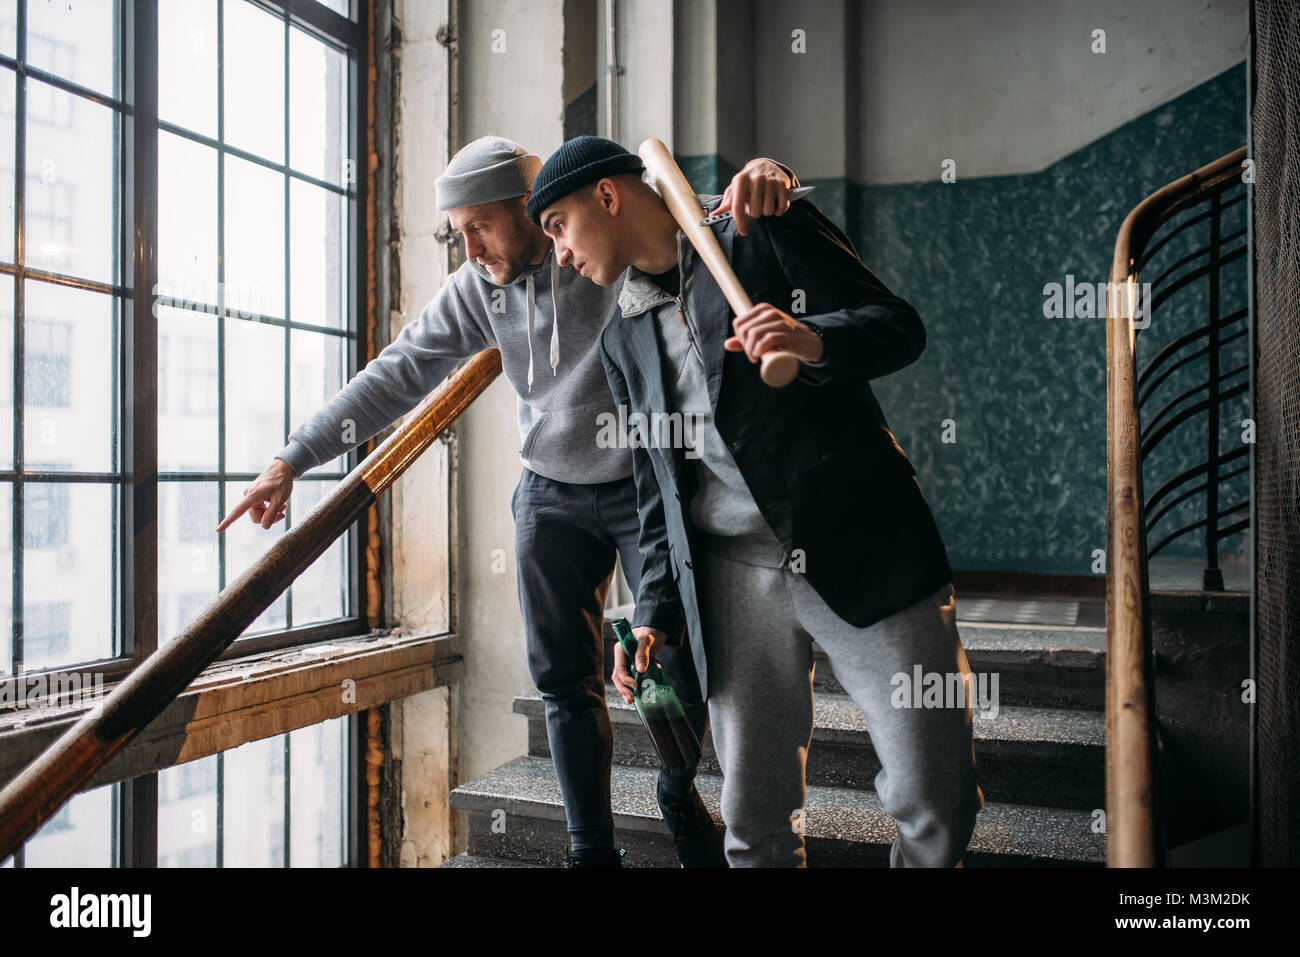 Page 3 - Hooligan And Bat High Resolution Stock Photography and Images -  Alamy